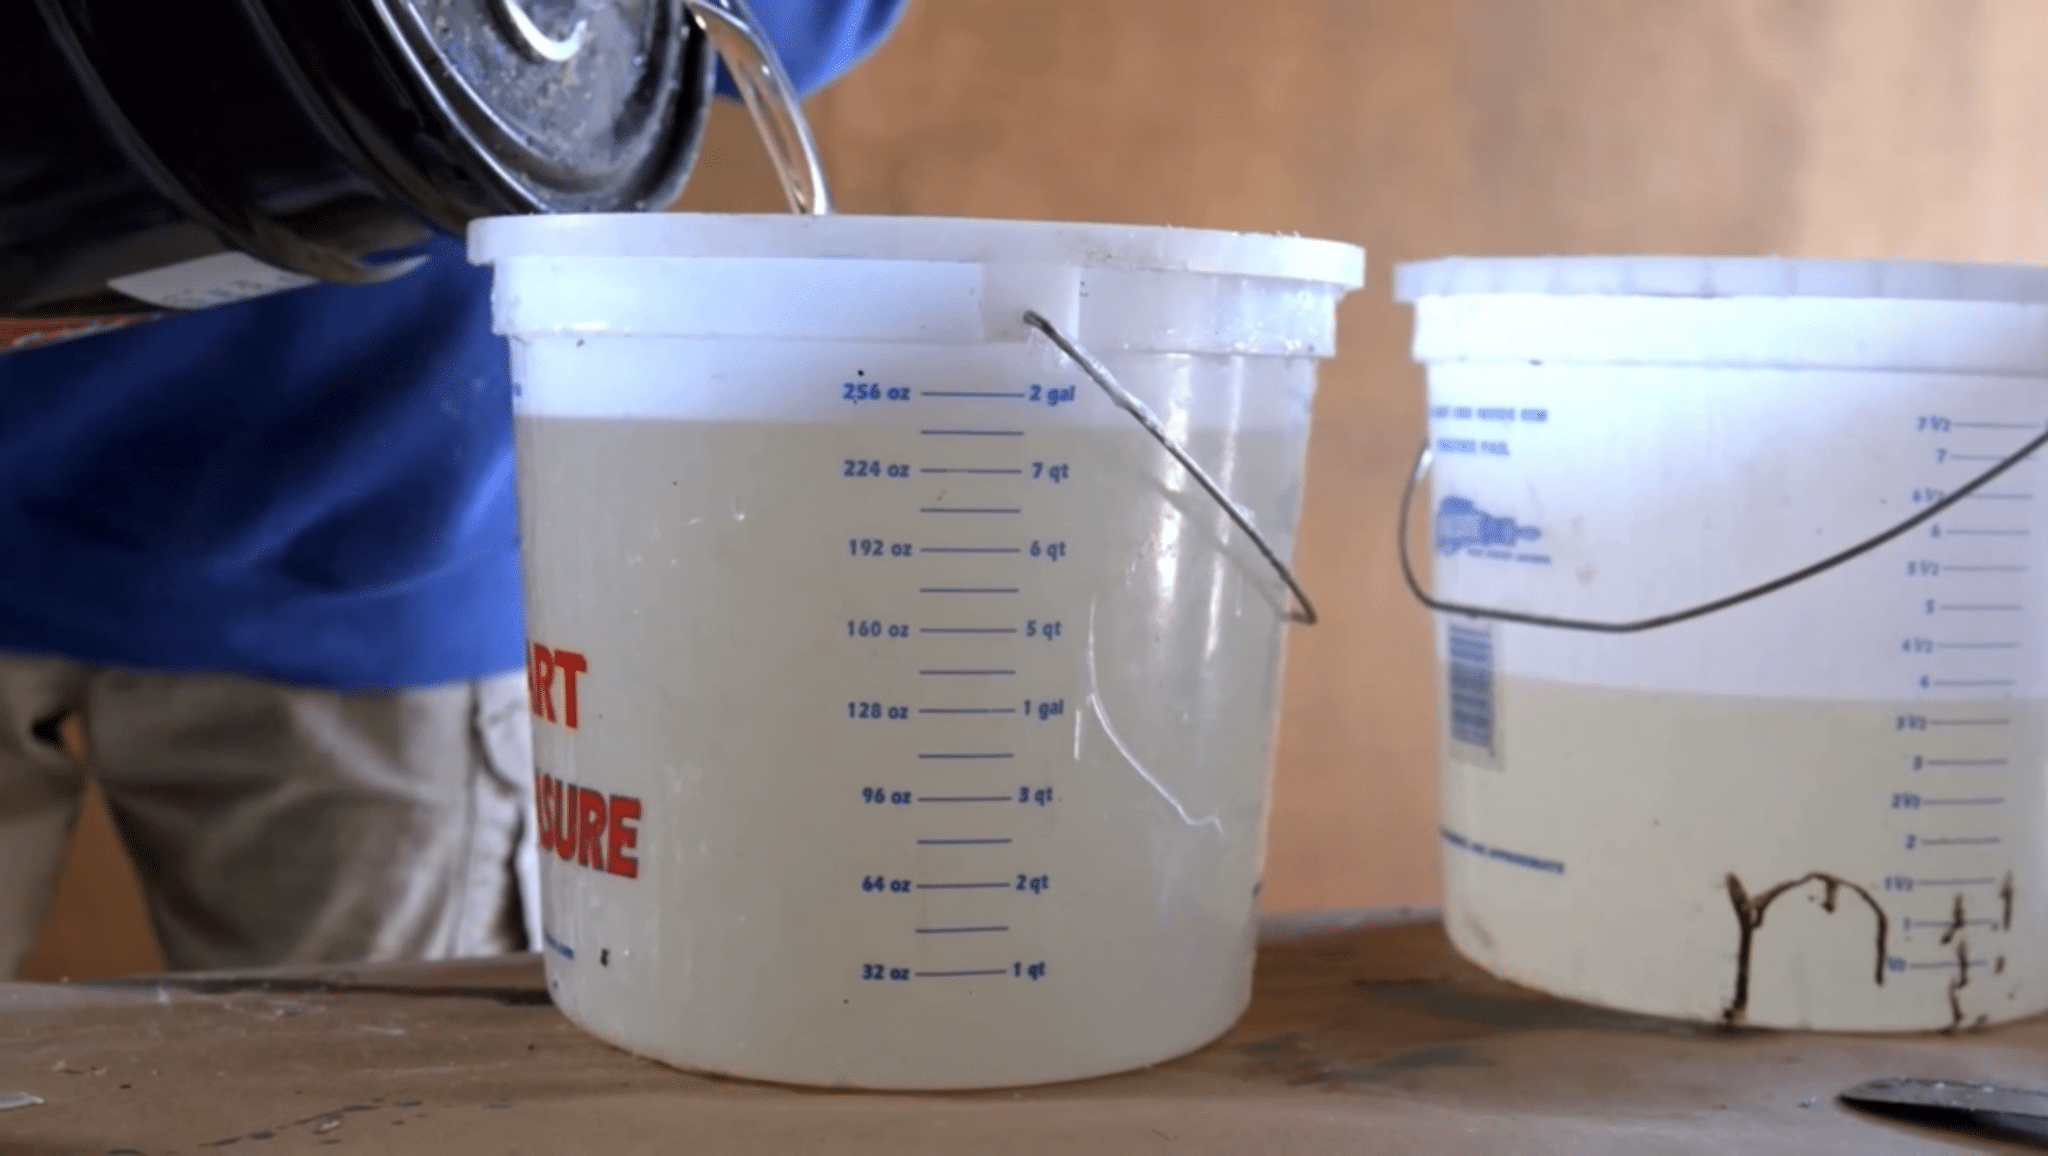 Two white graduated measuring buckets are on a surface; one is being filled with a liquid from a black container by a person.